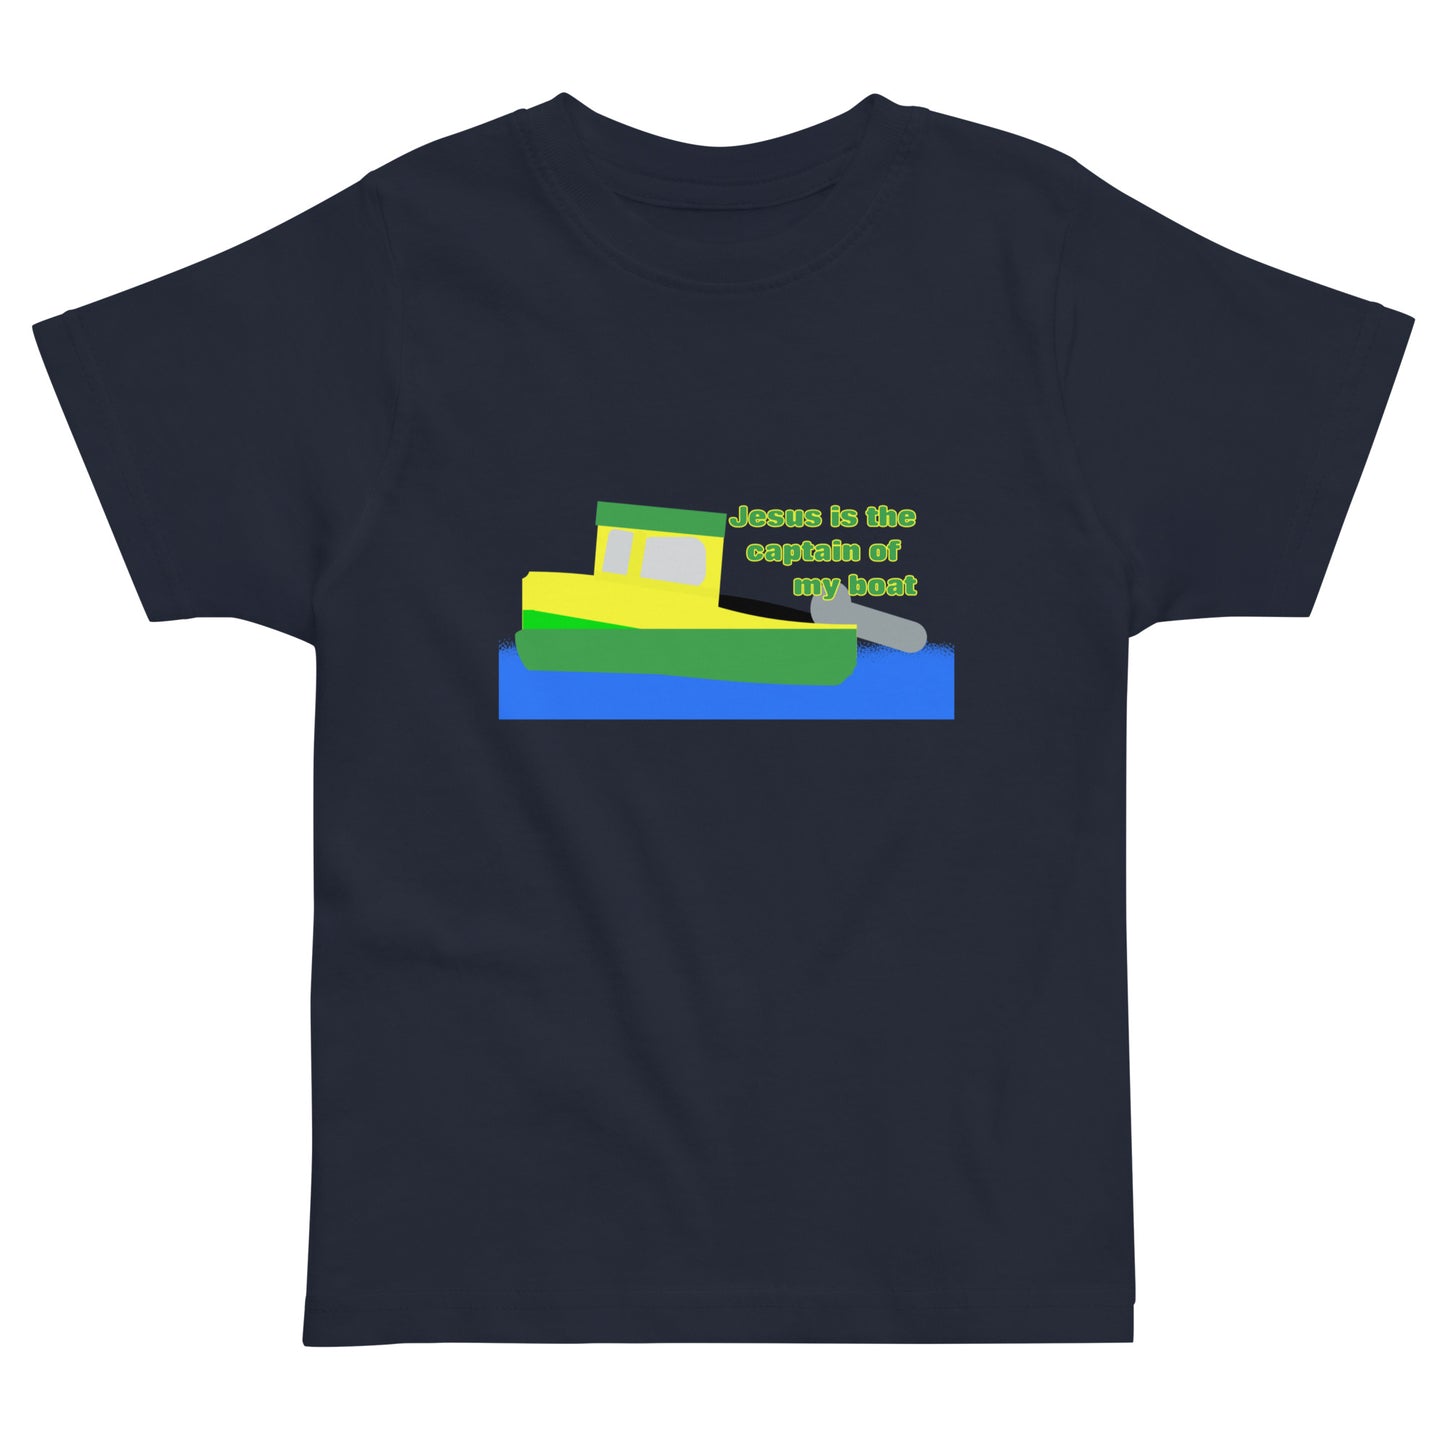 Jesus Is the Captain of My Boat (GY) Toddler T-Shirt